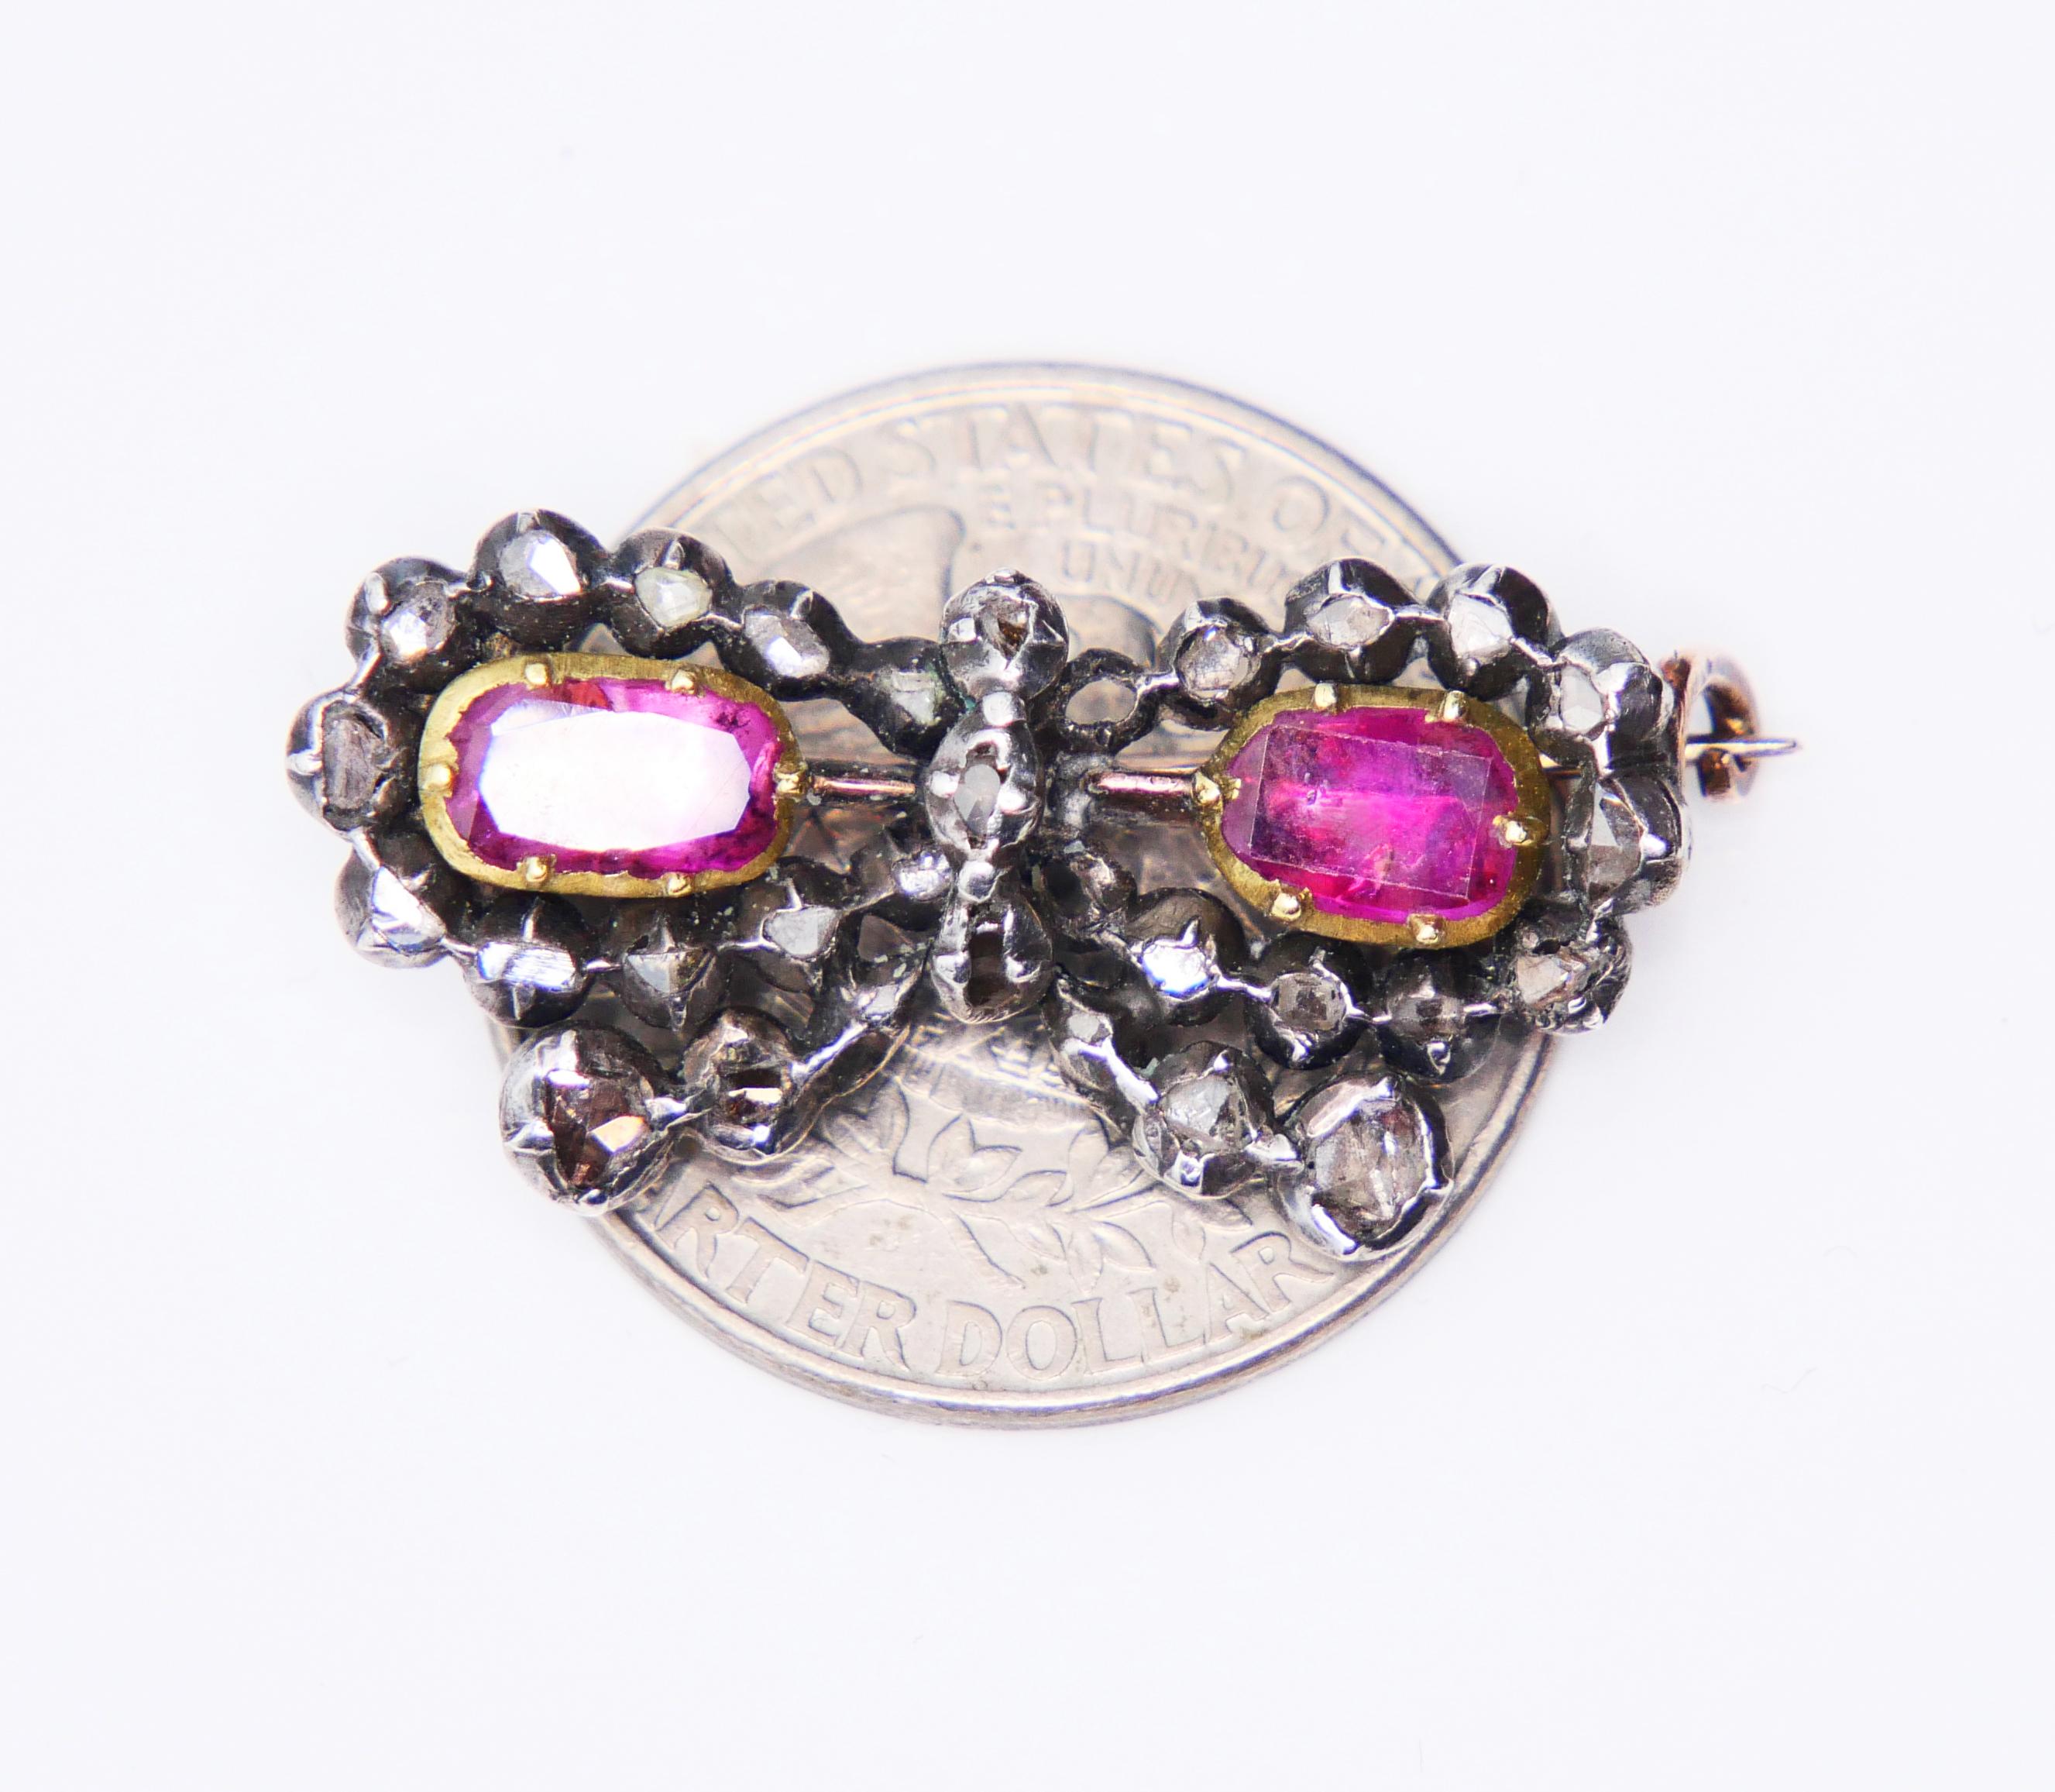 Antique Butterfly Brooch Pin 2ct Ruby 1.5 ct Diamond 10K Gold Silver / 3.9gr. For Sale 3